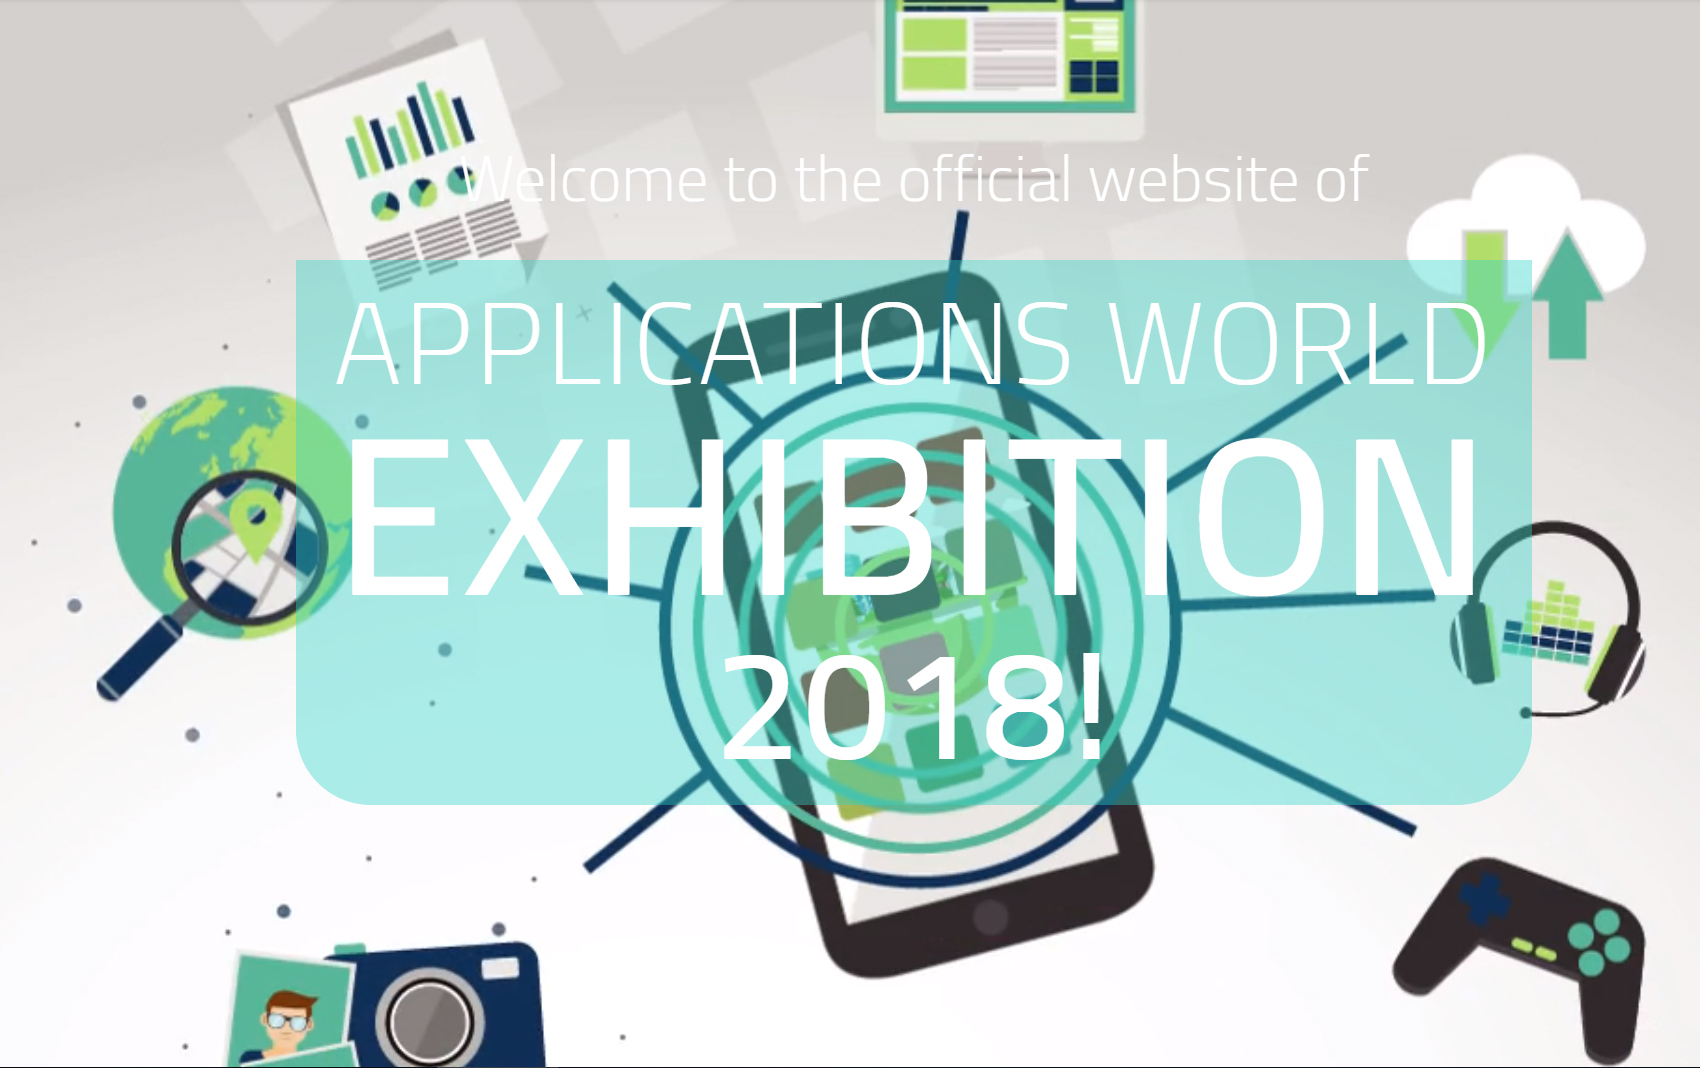 Applications World EXHIBITION 2018